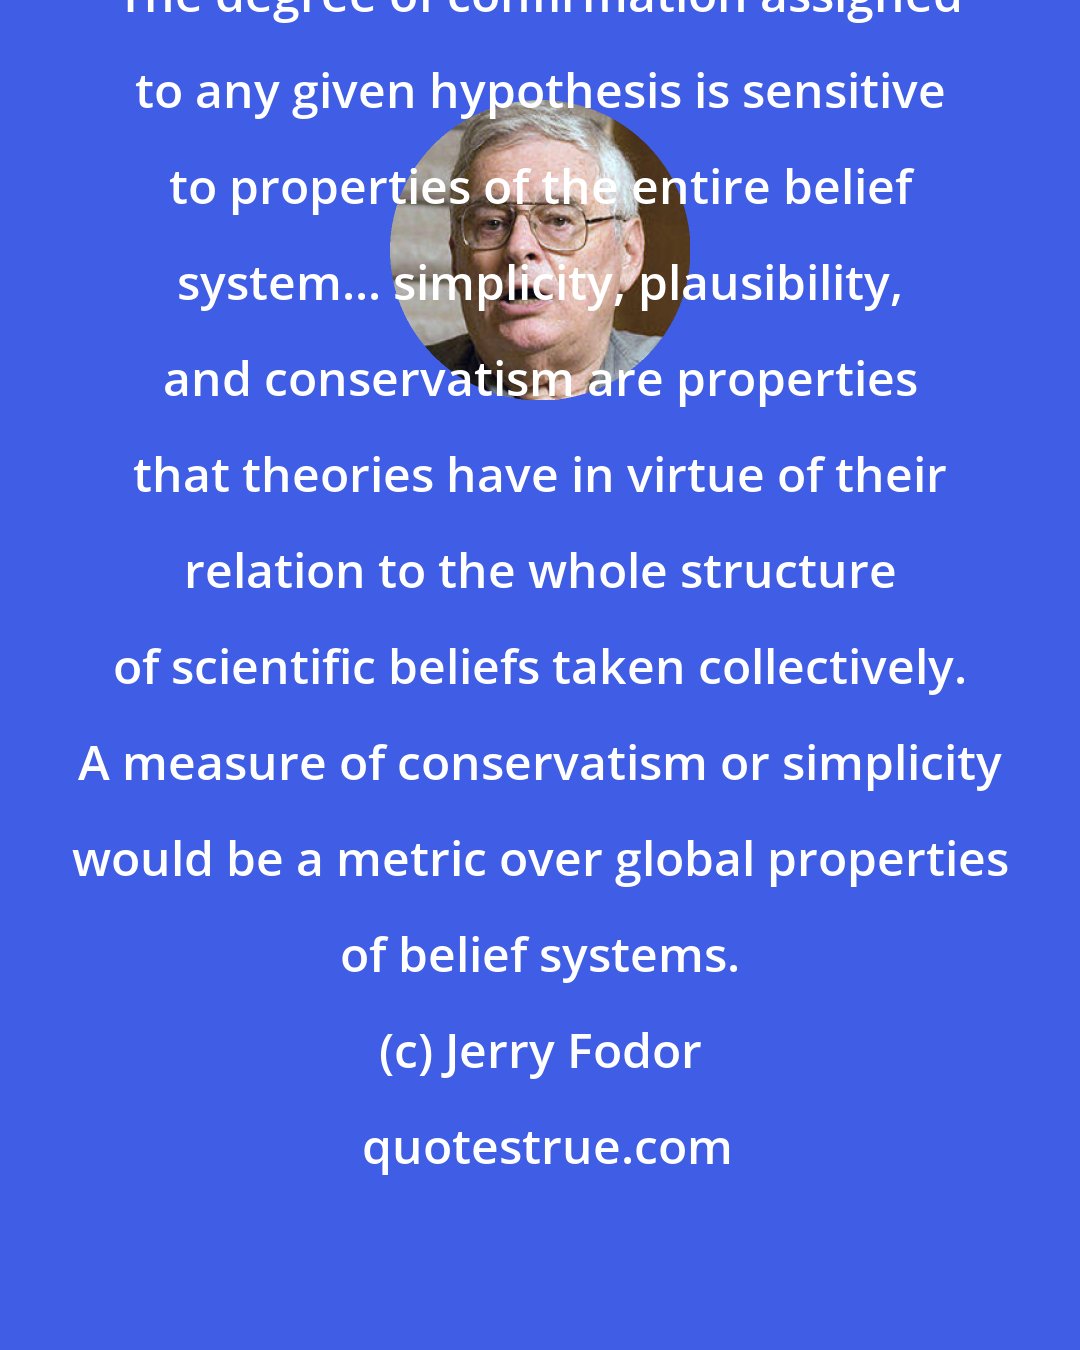 Jerry Fodor: The degree of confirmation assigned to any given hypothesis is sensitive to properties of the entire belief system... simplicity, plausibility, and conservatism are properties that theories have in virtue of their relation to the whole structure of scientific beliefs taken collectively. A measure of conservatism or simplicity would be a metric over global properties of belief systems.